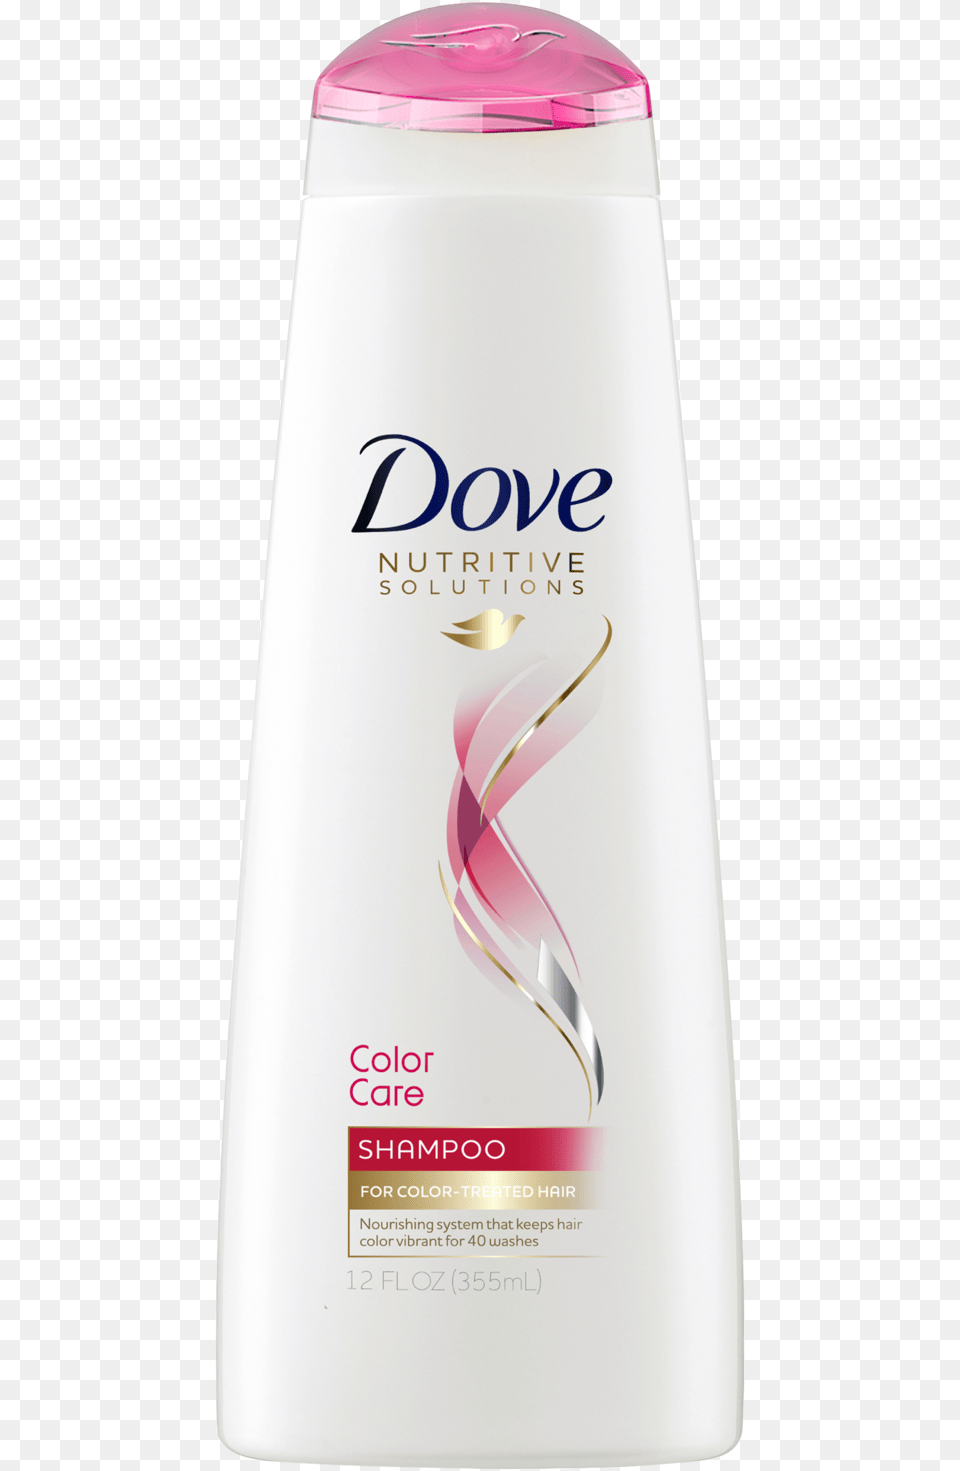 Dove Nutritive Solutions Color Care Shampoo 12 Oz Dove Conditioner Hair Fall Rescue, Bottle, Lotion, Cosmetics, Shaker Free Png